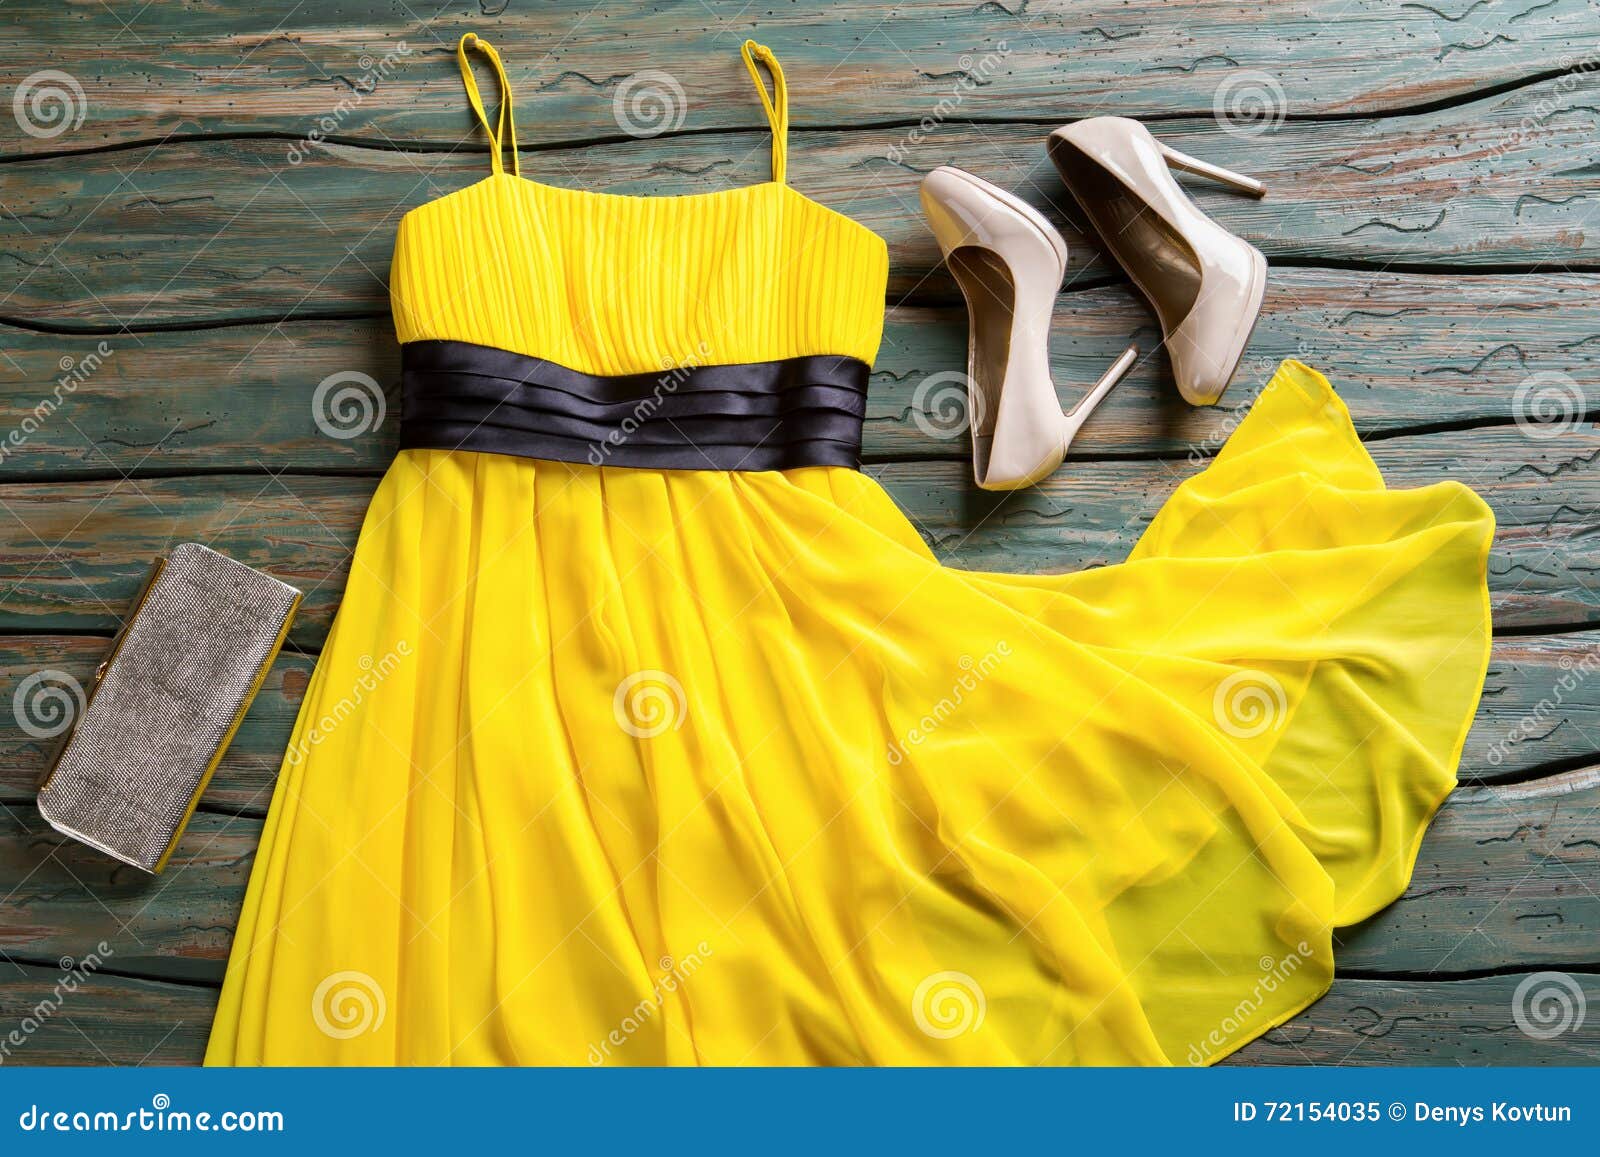 Outfit of the Day: Yellow Bag and Matching Shoes